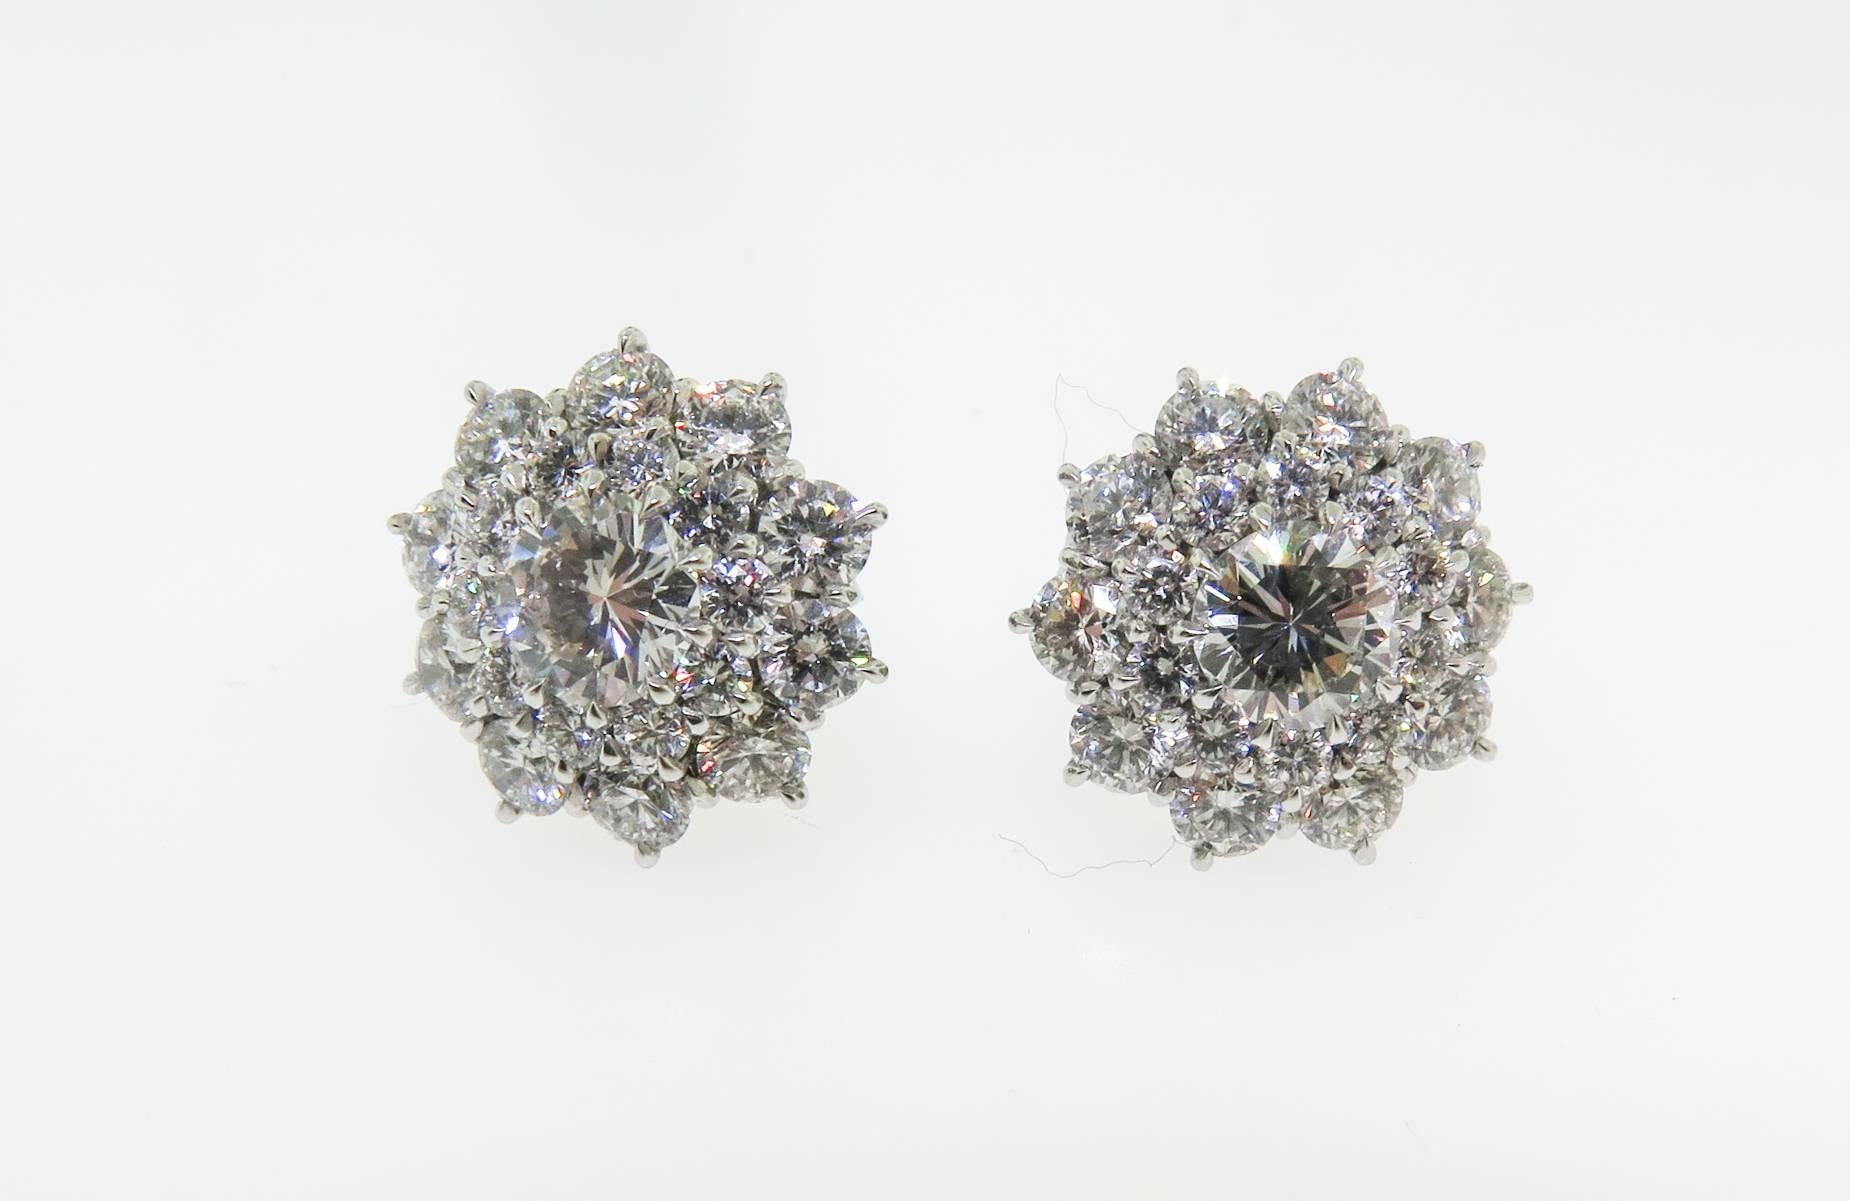 More inspired than a traditional stud, yet very wearable. Choose these if you desire an important, classic earring that will set you apart from their more mainstreamly-adorned counterparts. The earrings are set with a round brilliant diamond- 0.50